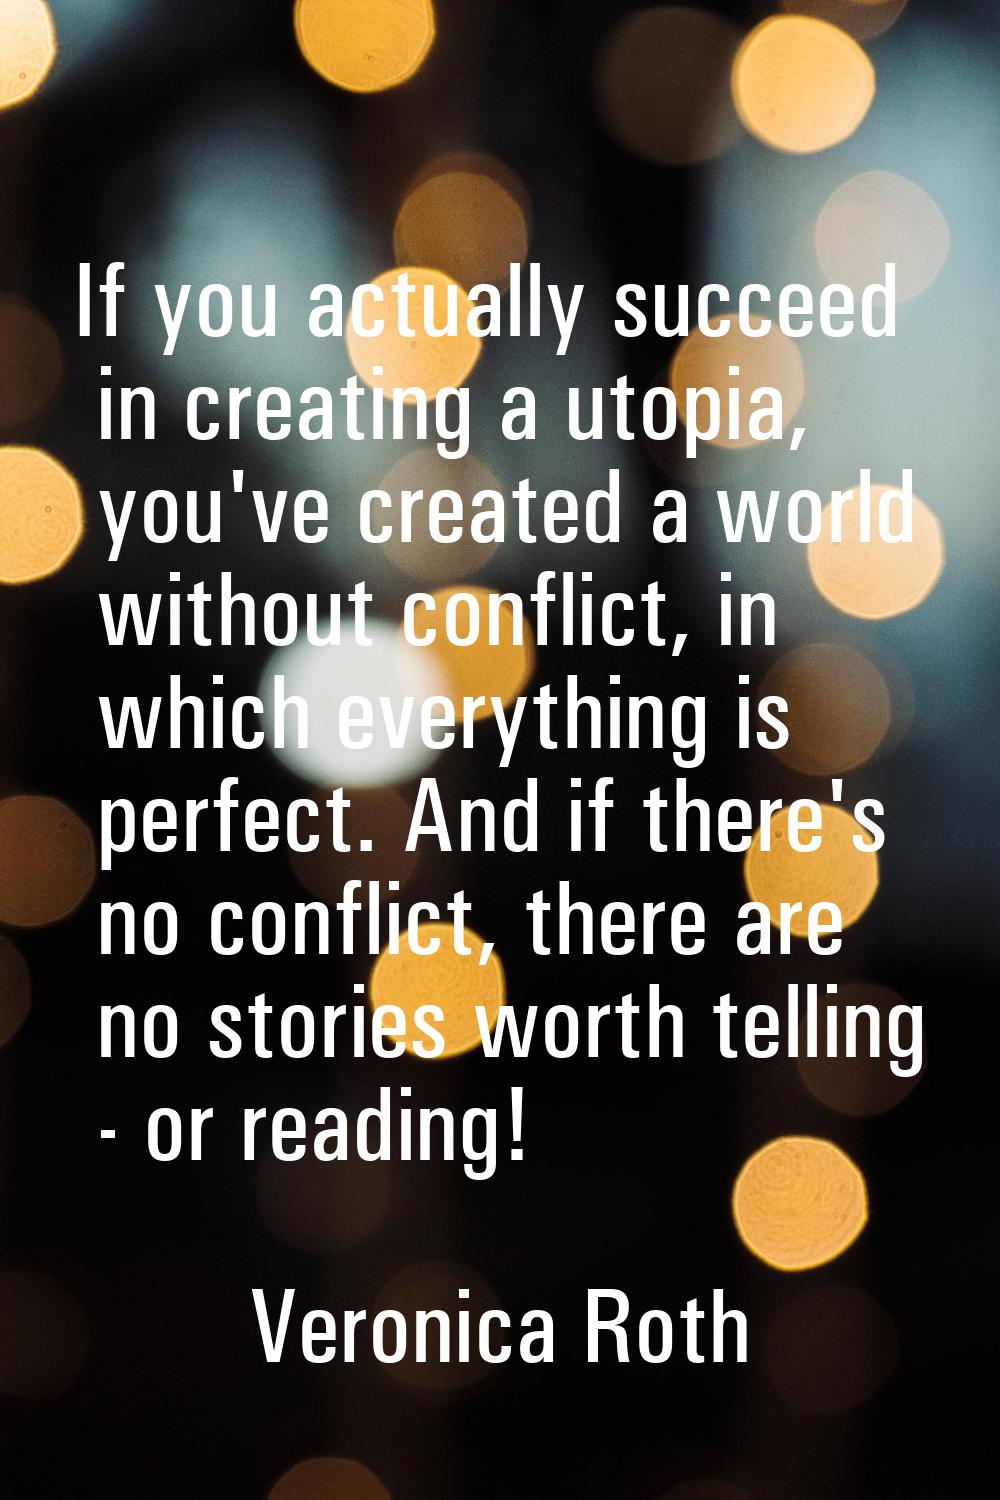 If you actually succeed in creating a utopia, you've created a world without conflict, in which eve